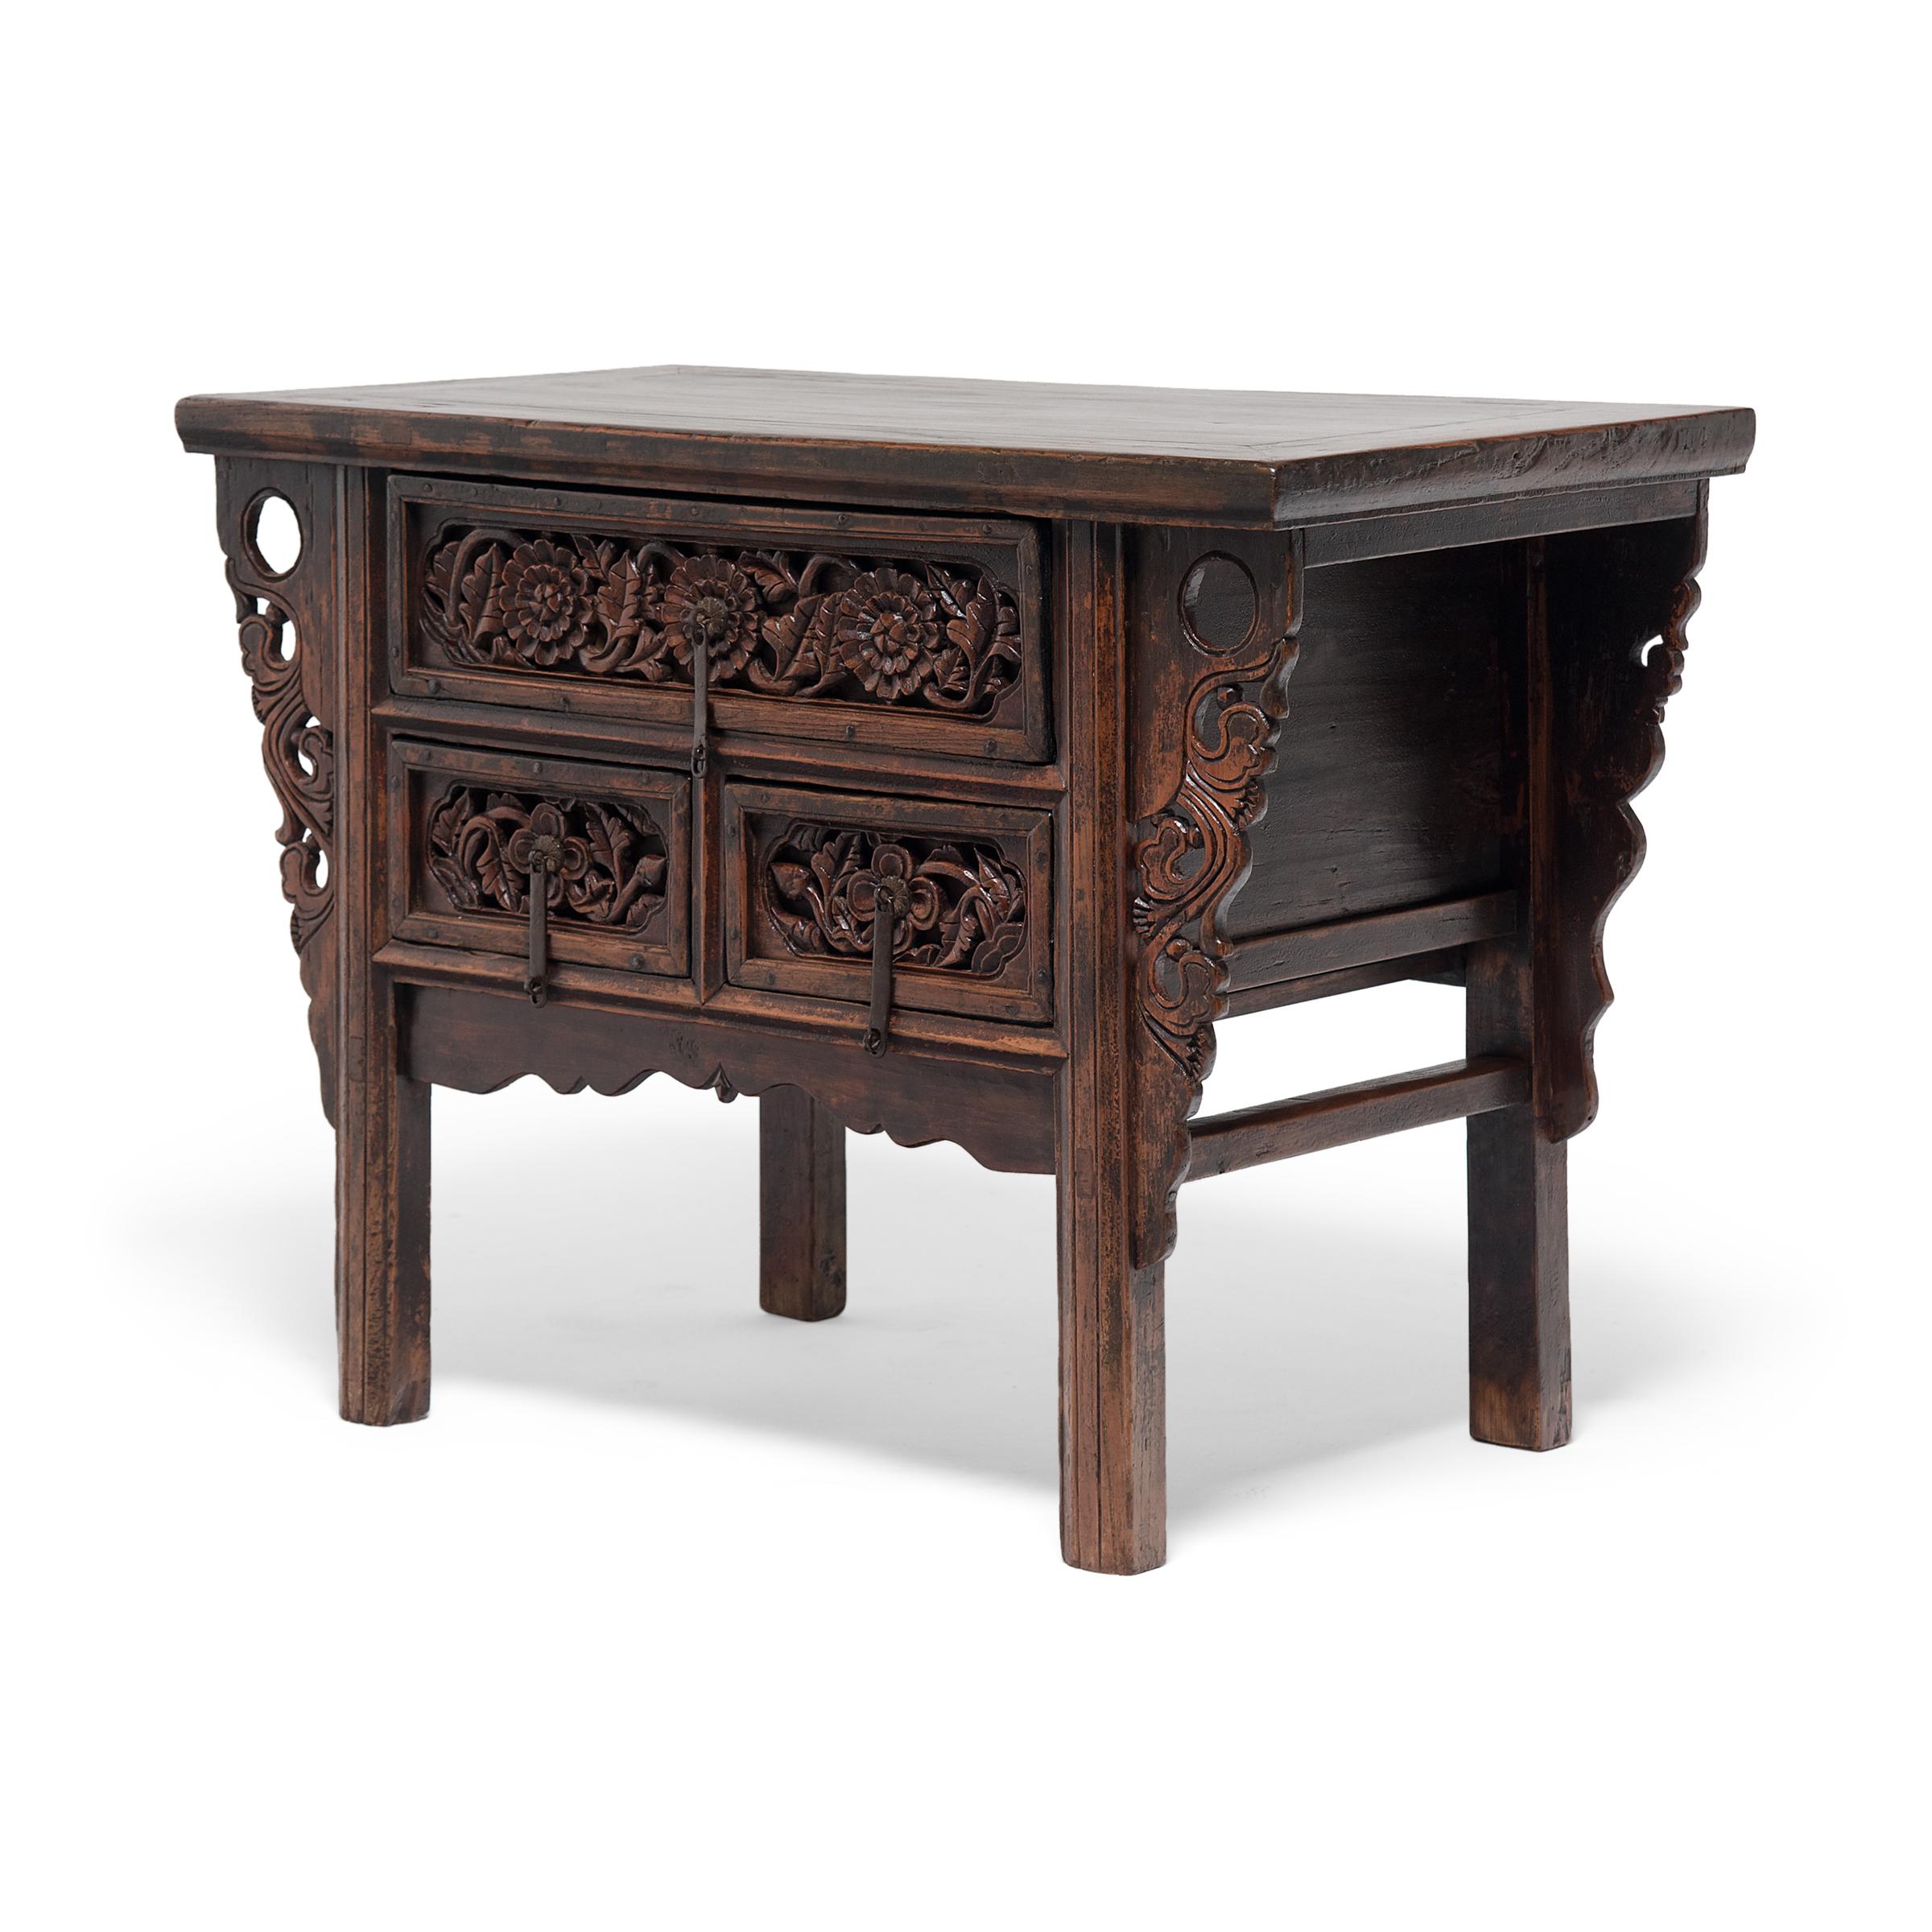 Used as a family altar table or for general storage, this 19th century coffer is decorated with intricate carvings of round chrysanthemum blossoms, symbols of autumn and joviality. The table rests on straight legs that link to the rectangular table